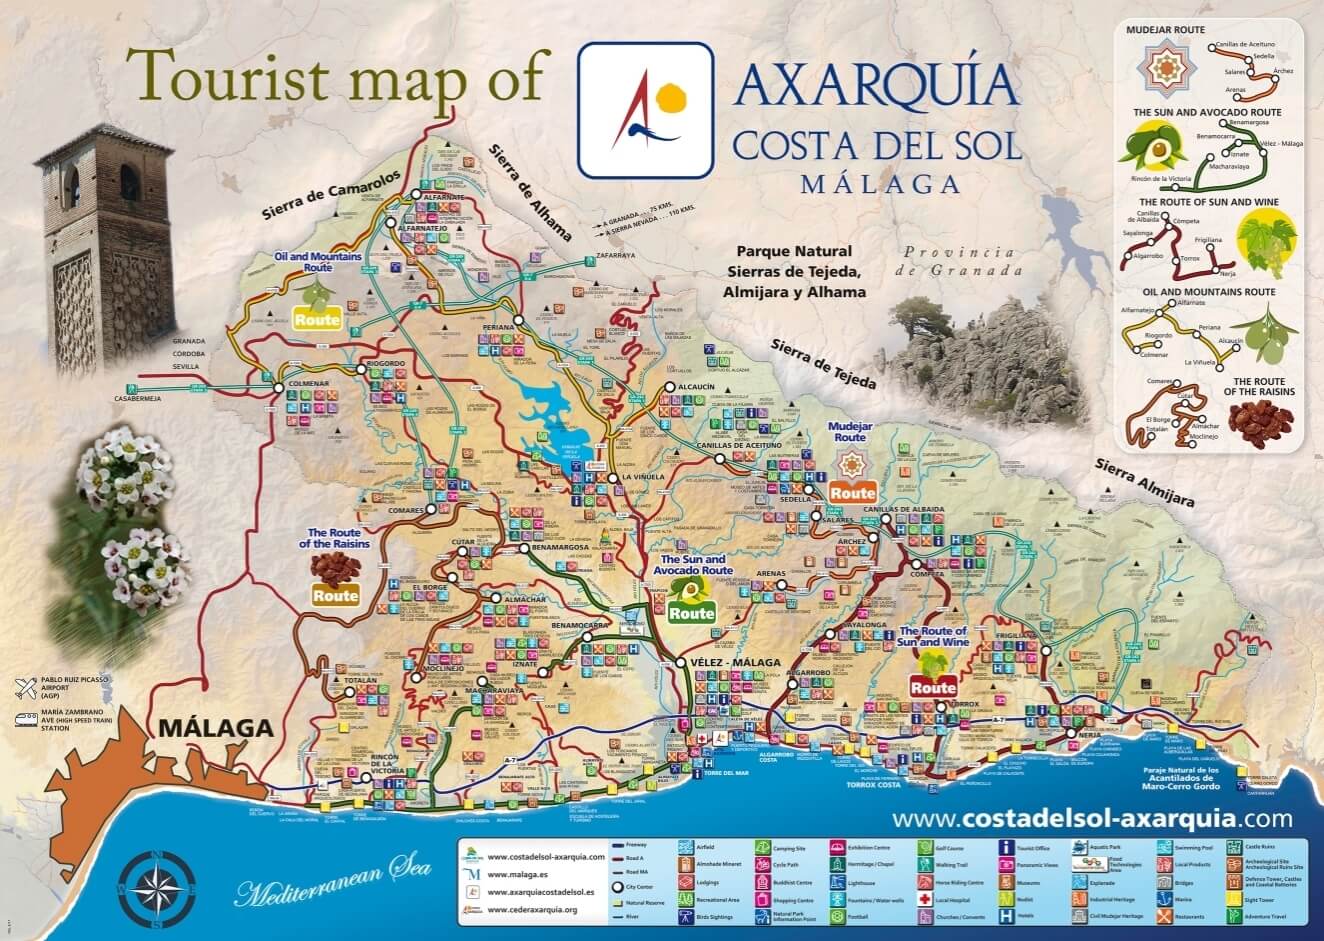 Tourist map of Axarquía and the Costa del Sol